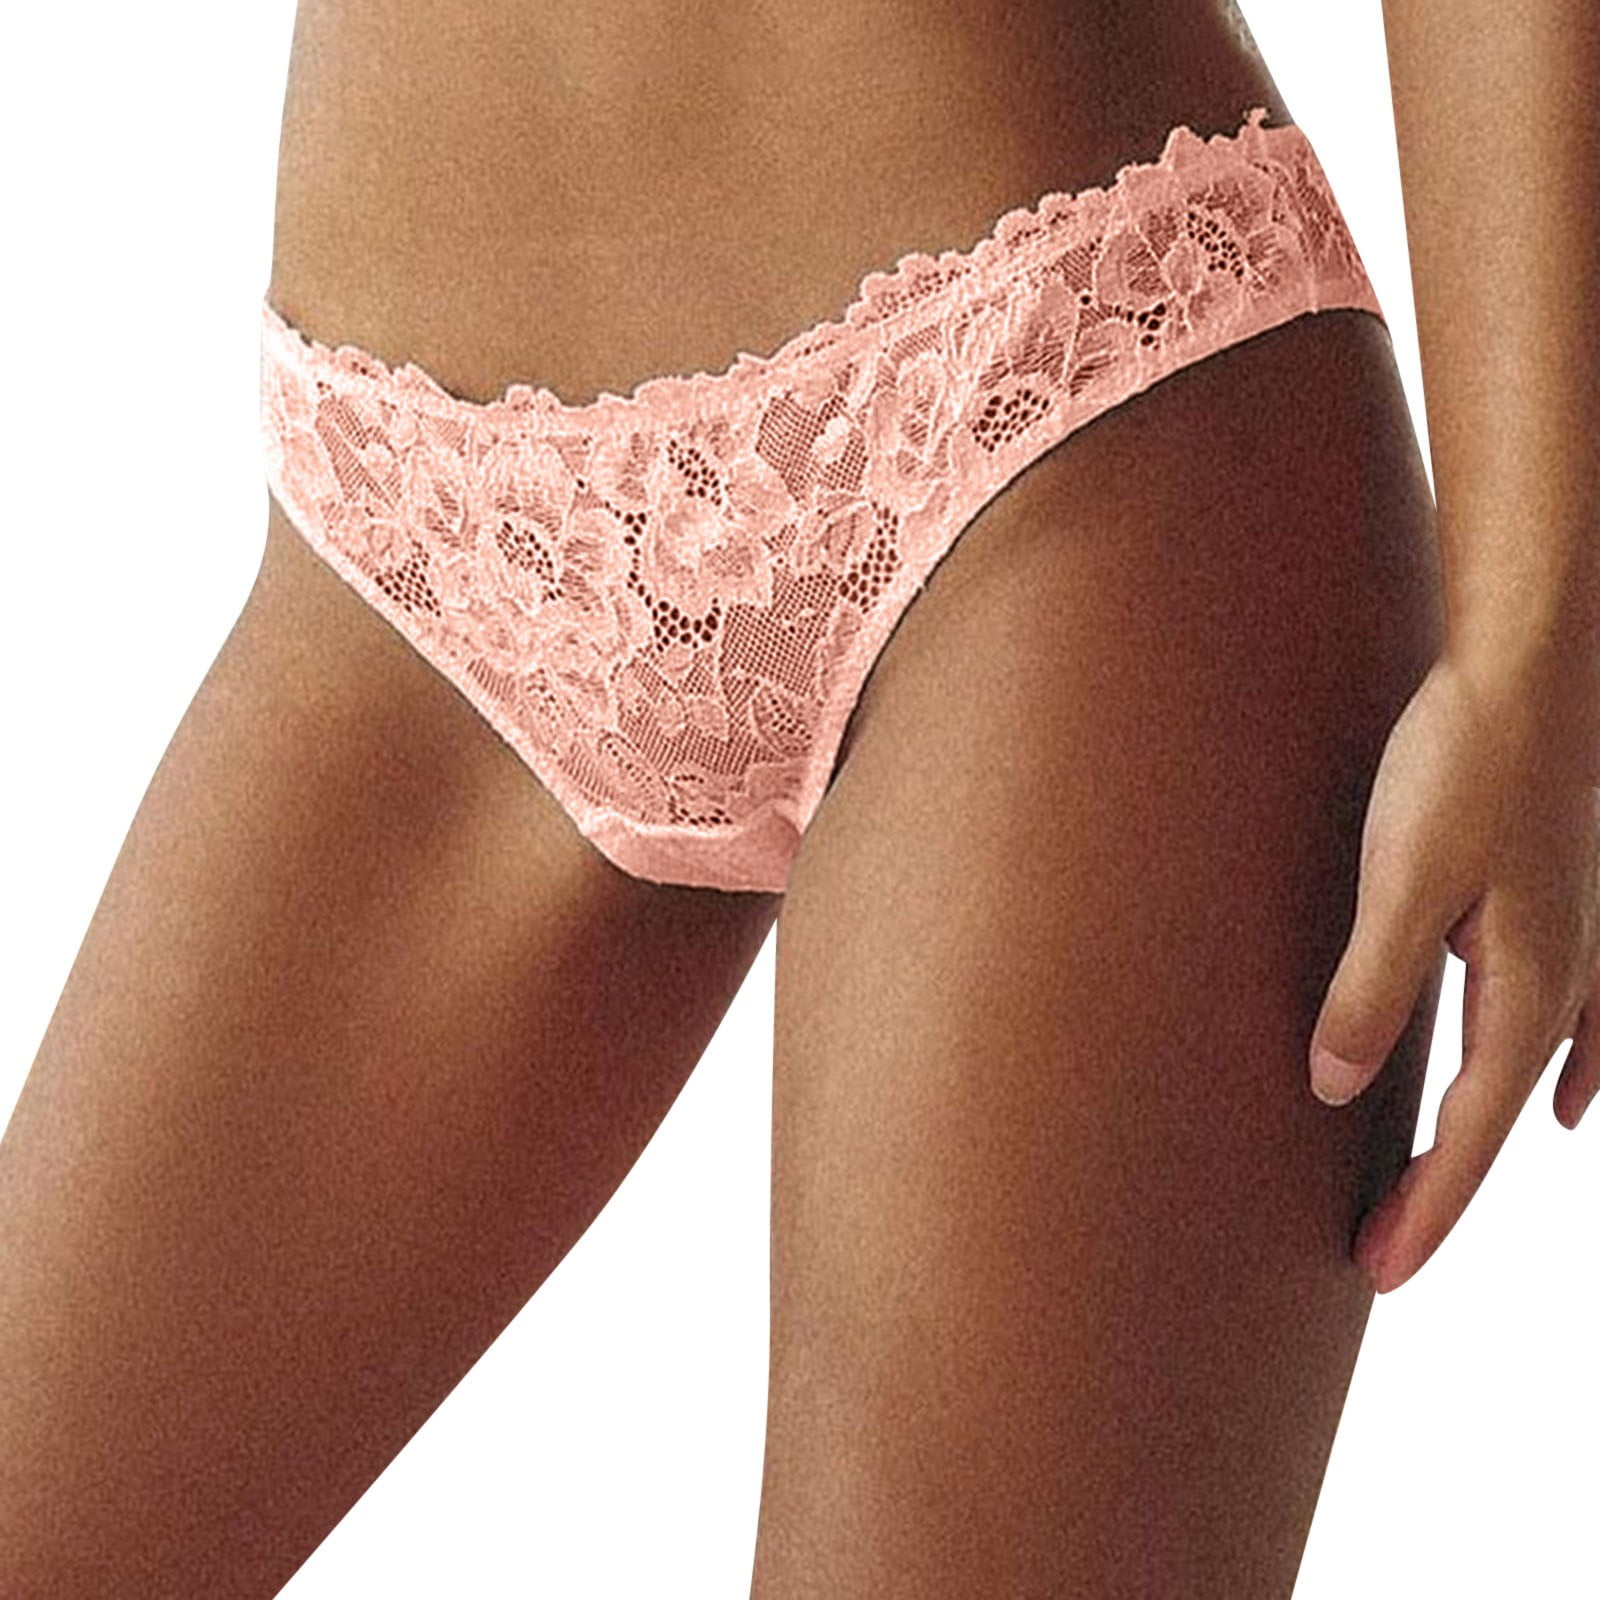 Uuszgmr Womens Lingeries Lace Floral Crochet Lace Rhinestone Underwear  Panty For Wedding Night,Romantic Valentine'S Day And Every Hot Sweet